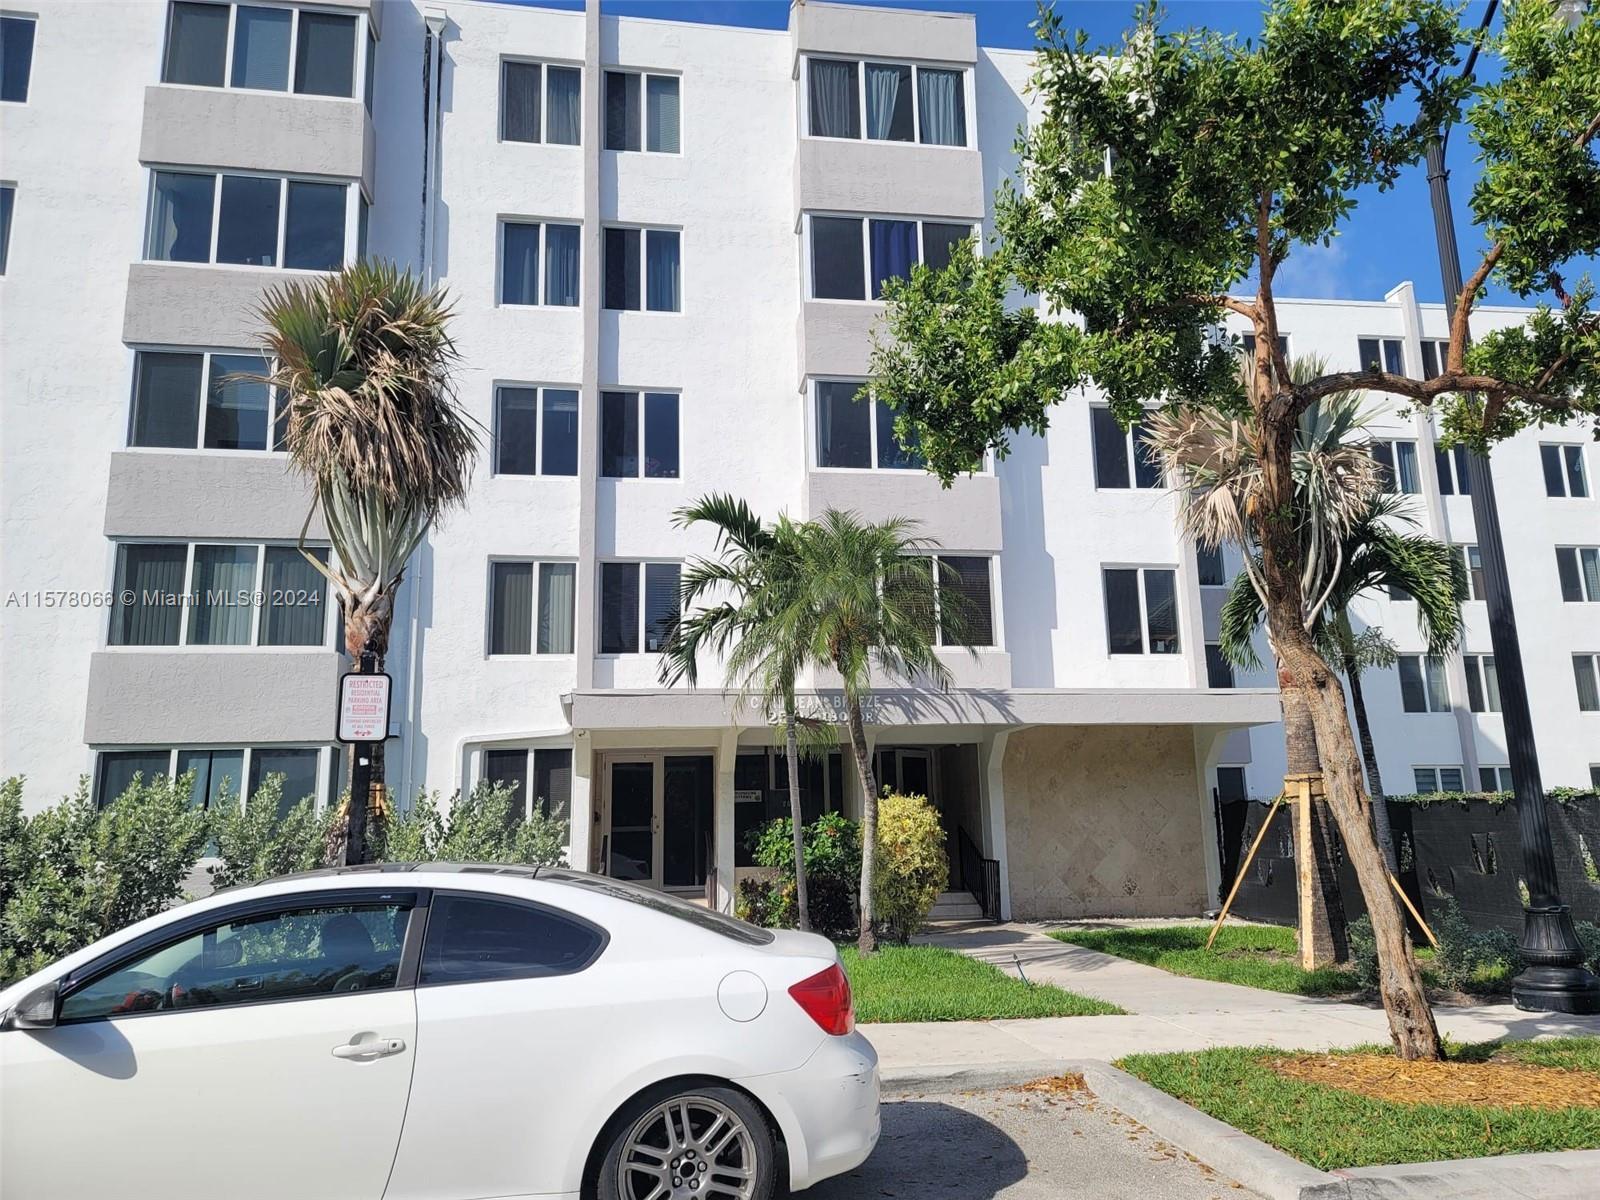 Photo of 250 180 Dr #110 in Sunny Isles Beach, FL